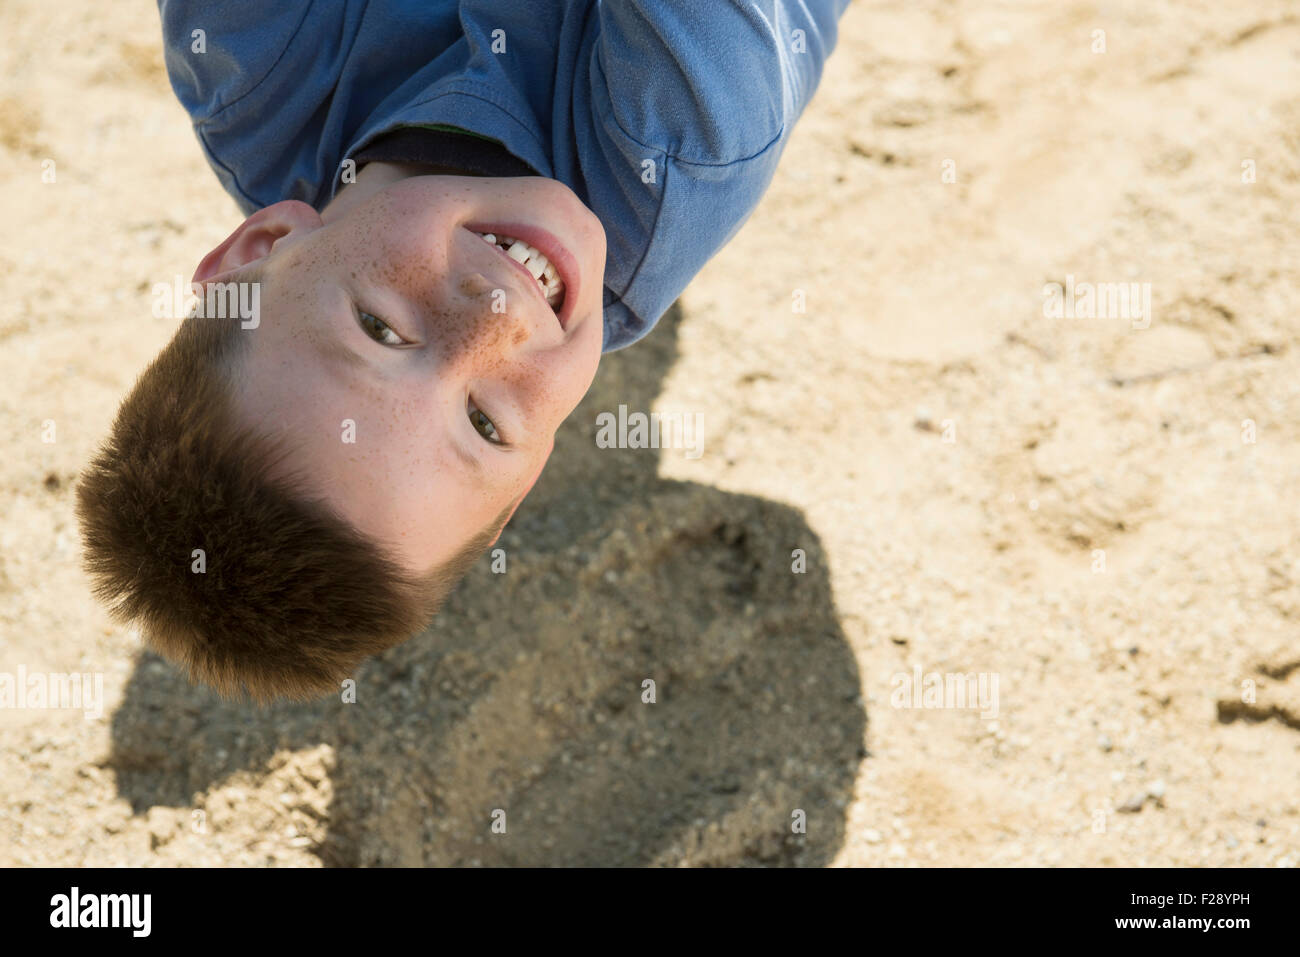 Boy hanging upside down from rope in playground, Munich, Bavaria, Germany Stock Photo